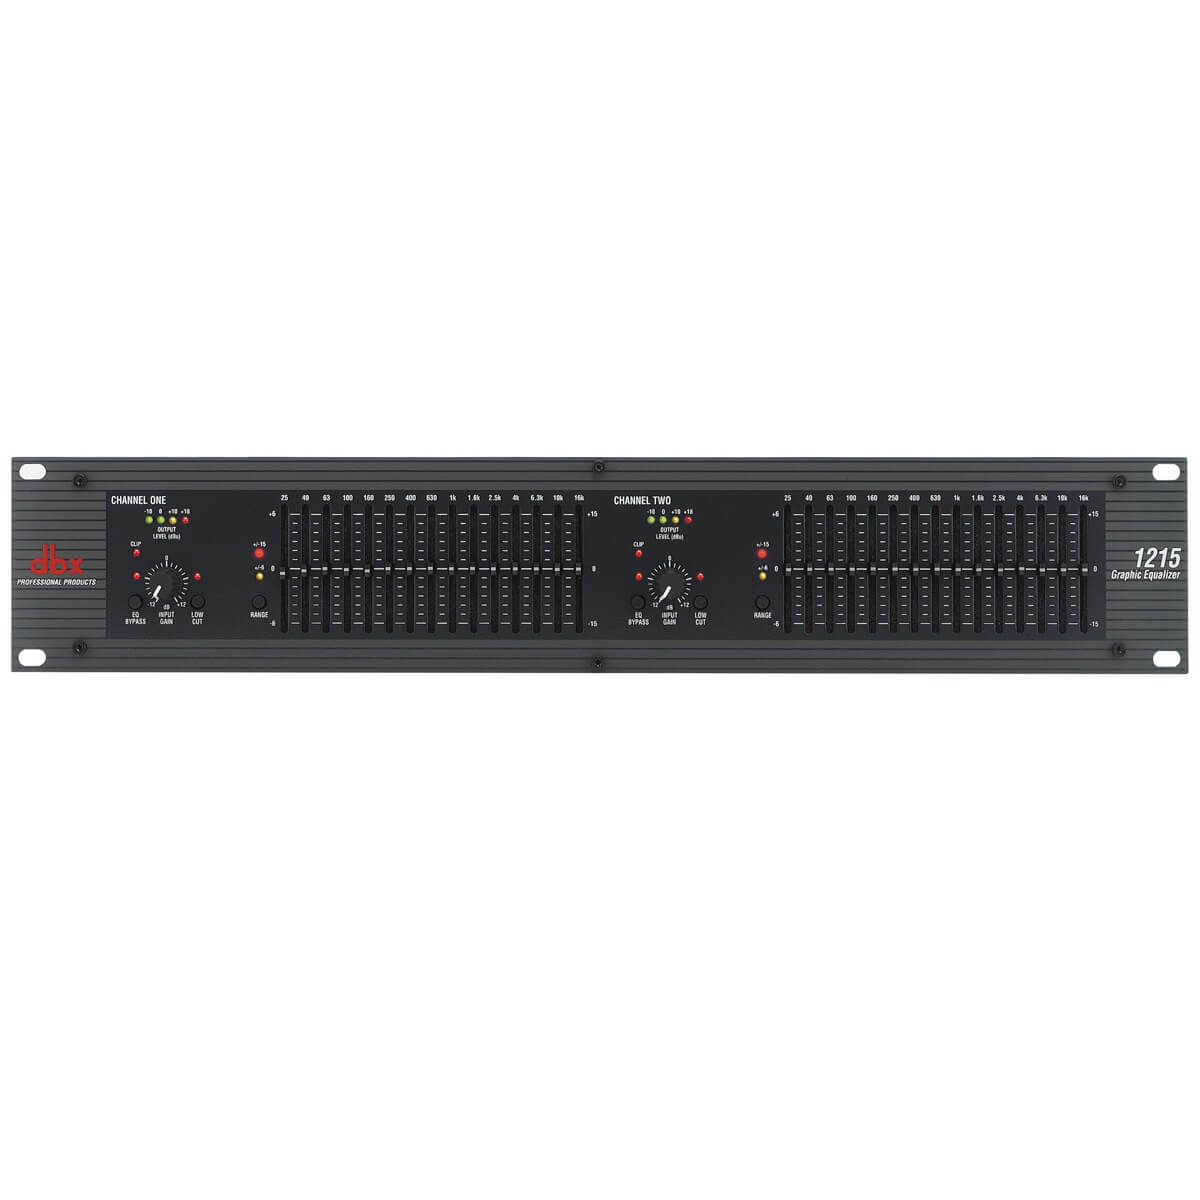 dbx 1215 - Dual Channel, 15-Band Equalizer, front